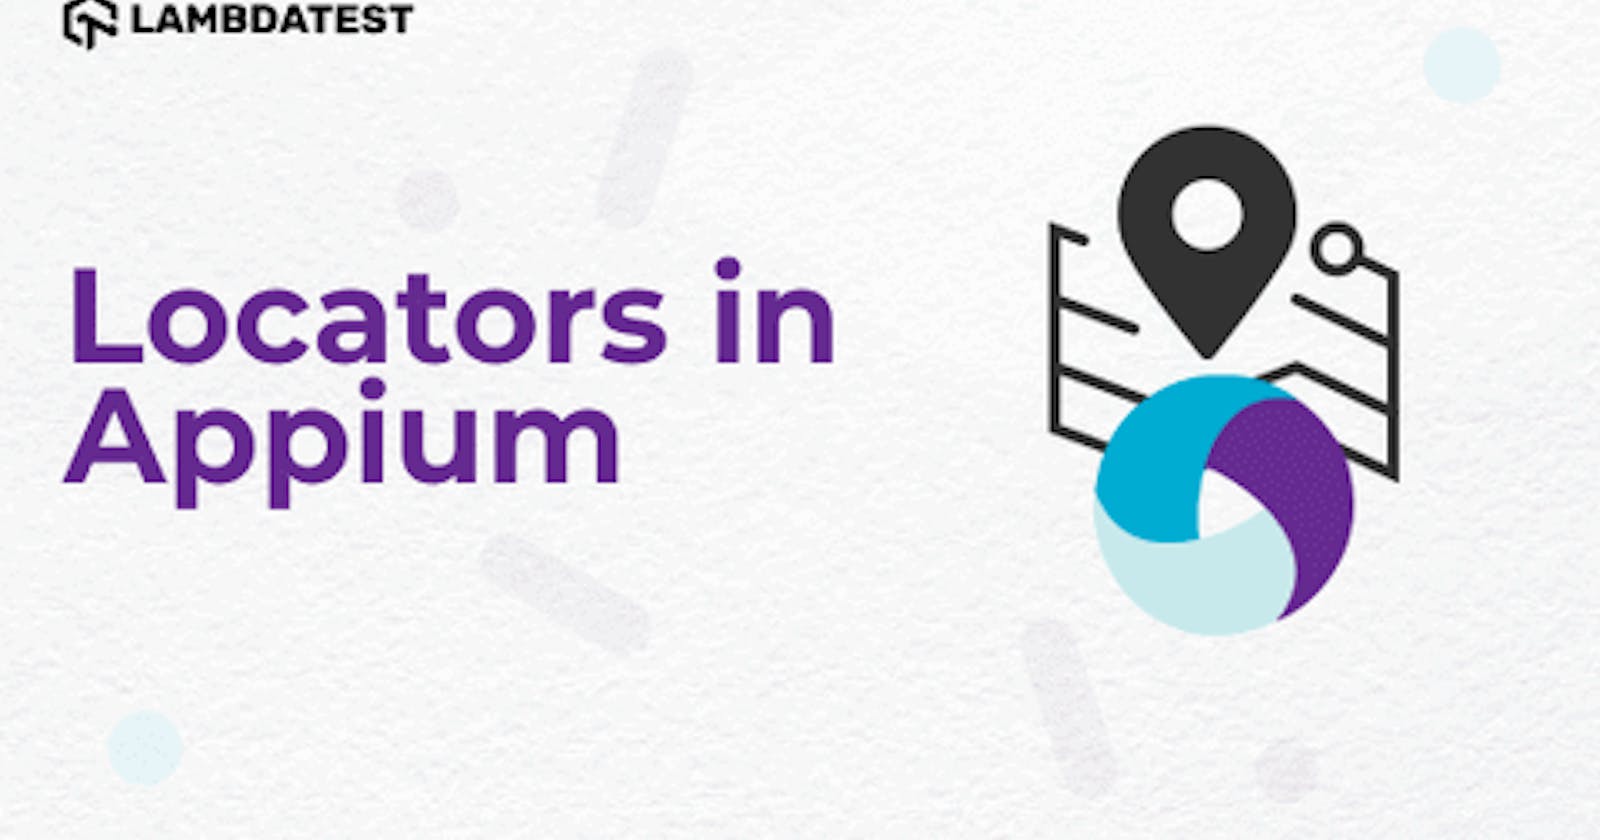 How To Identify Locators In Appium [With Examples]